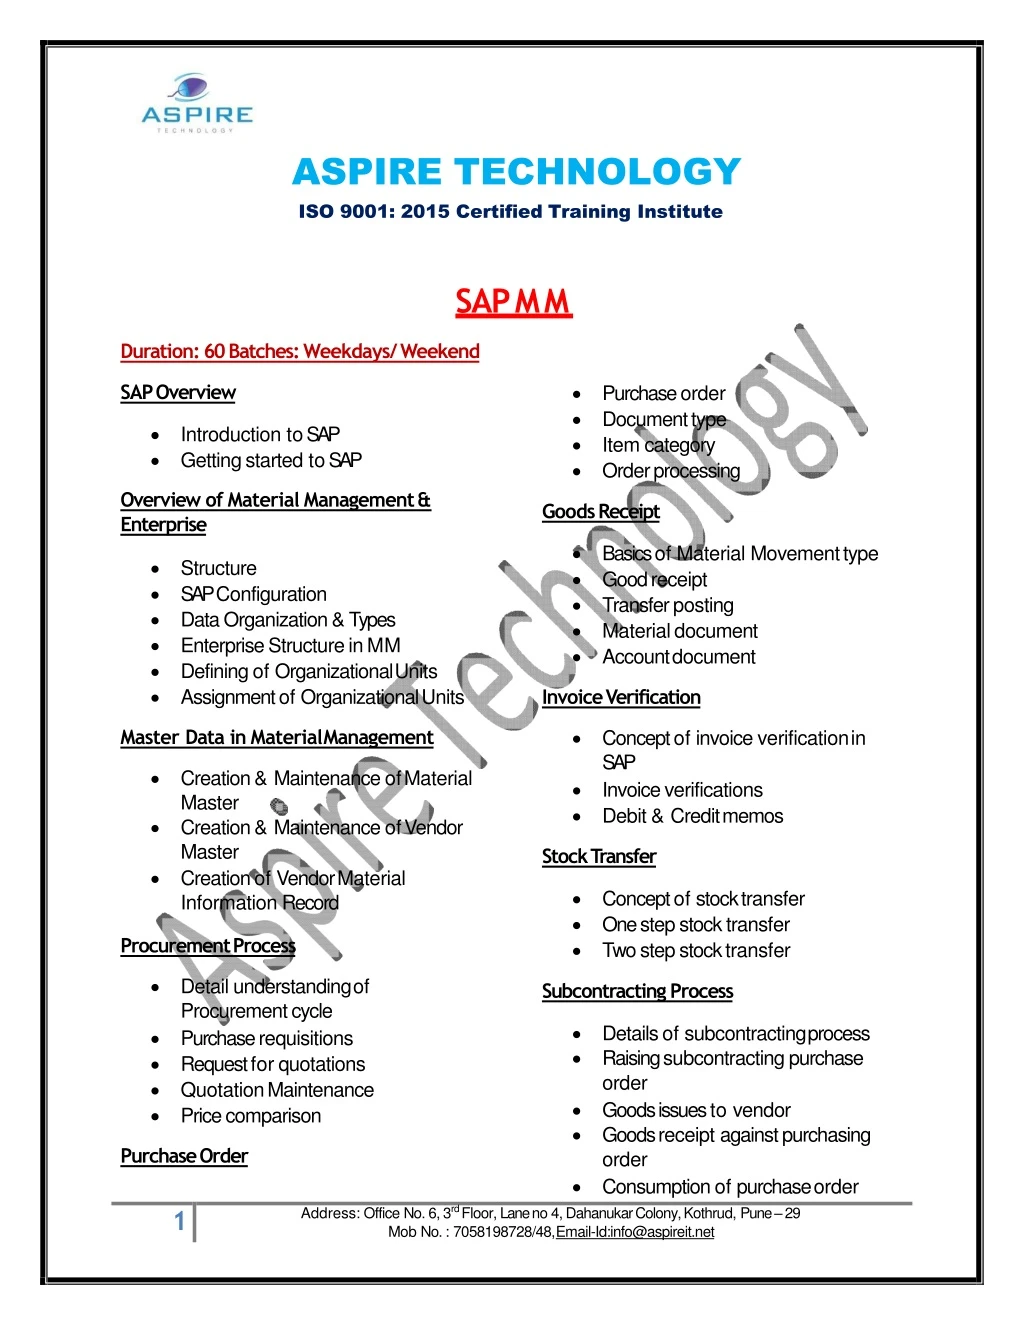 aspire technology iso 9001 2015 certified training institute